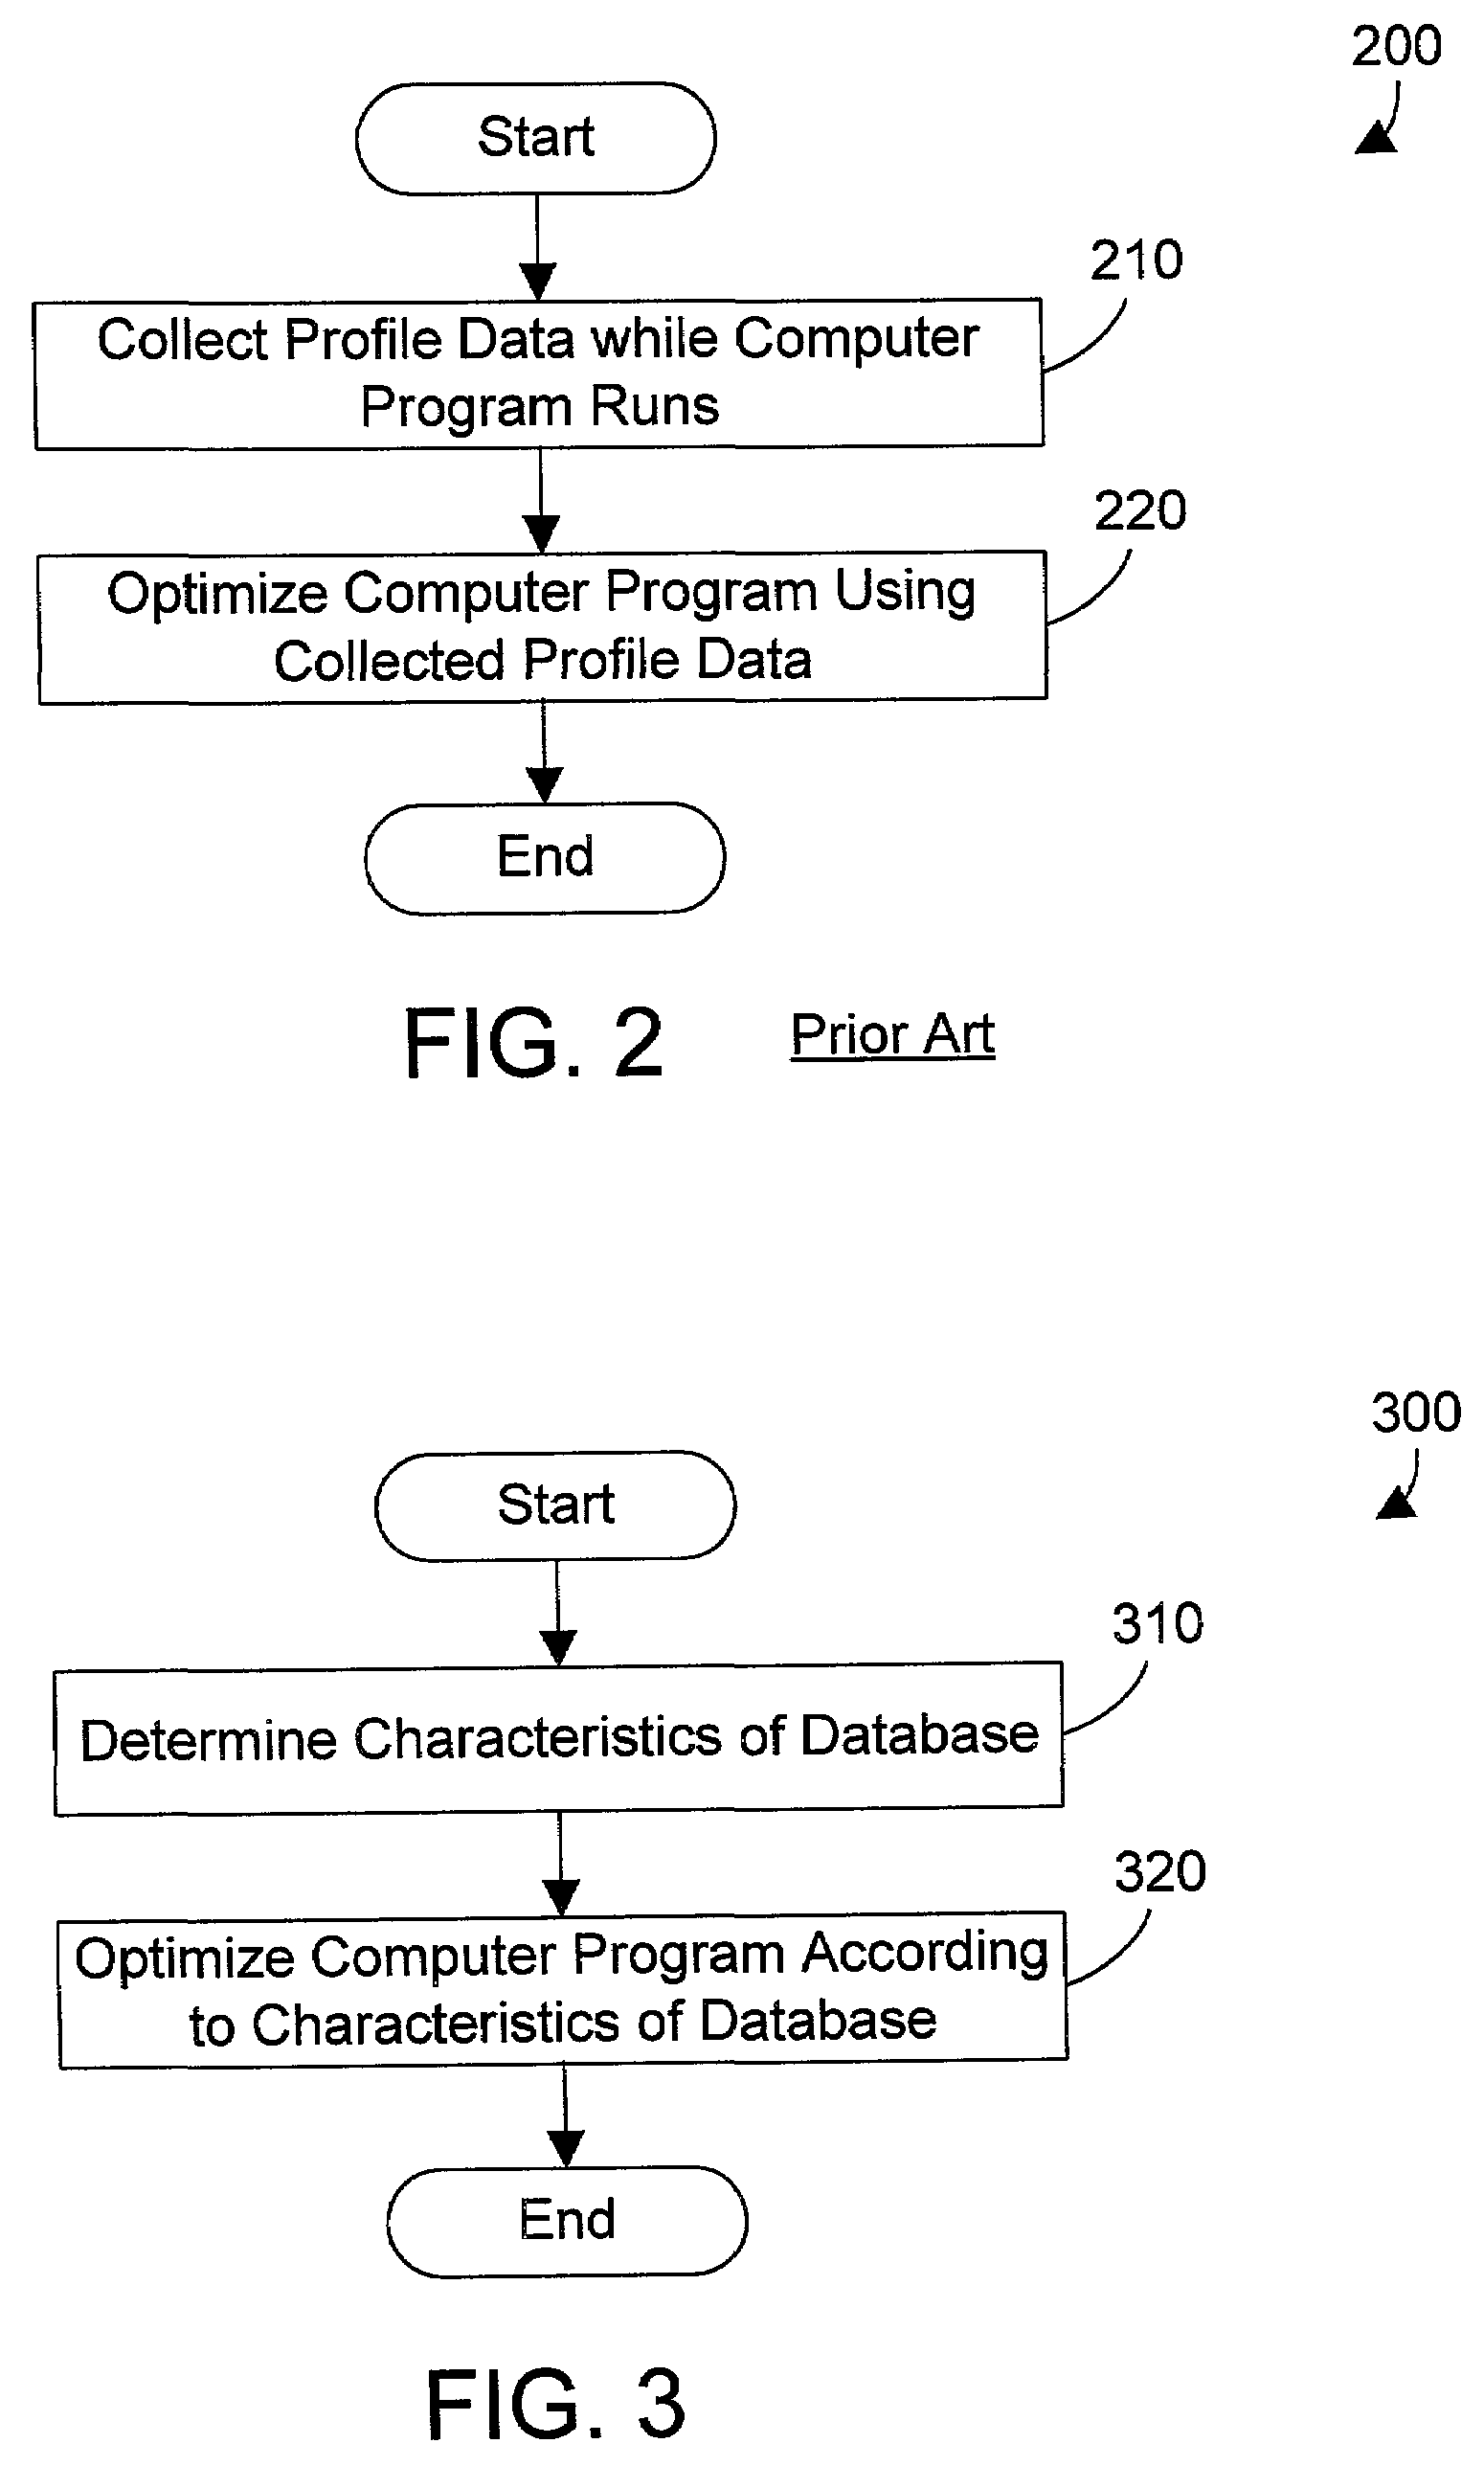 Apparatus and method for using database knowledge to optimize a computer program